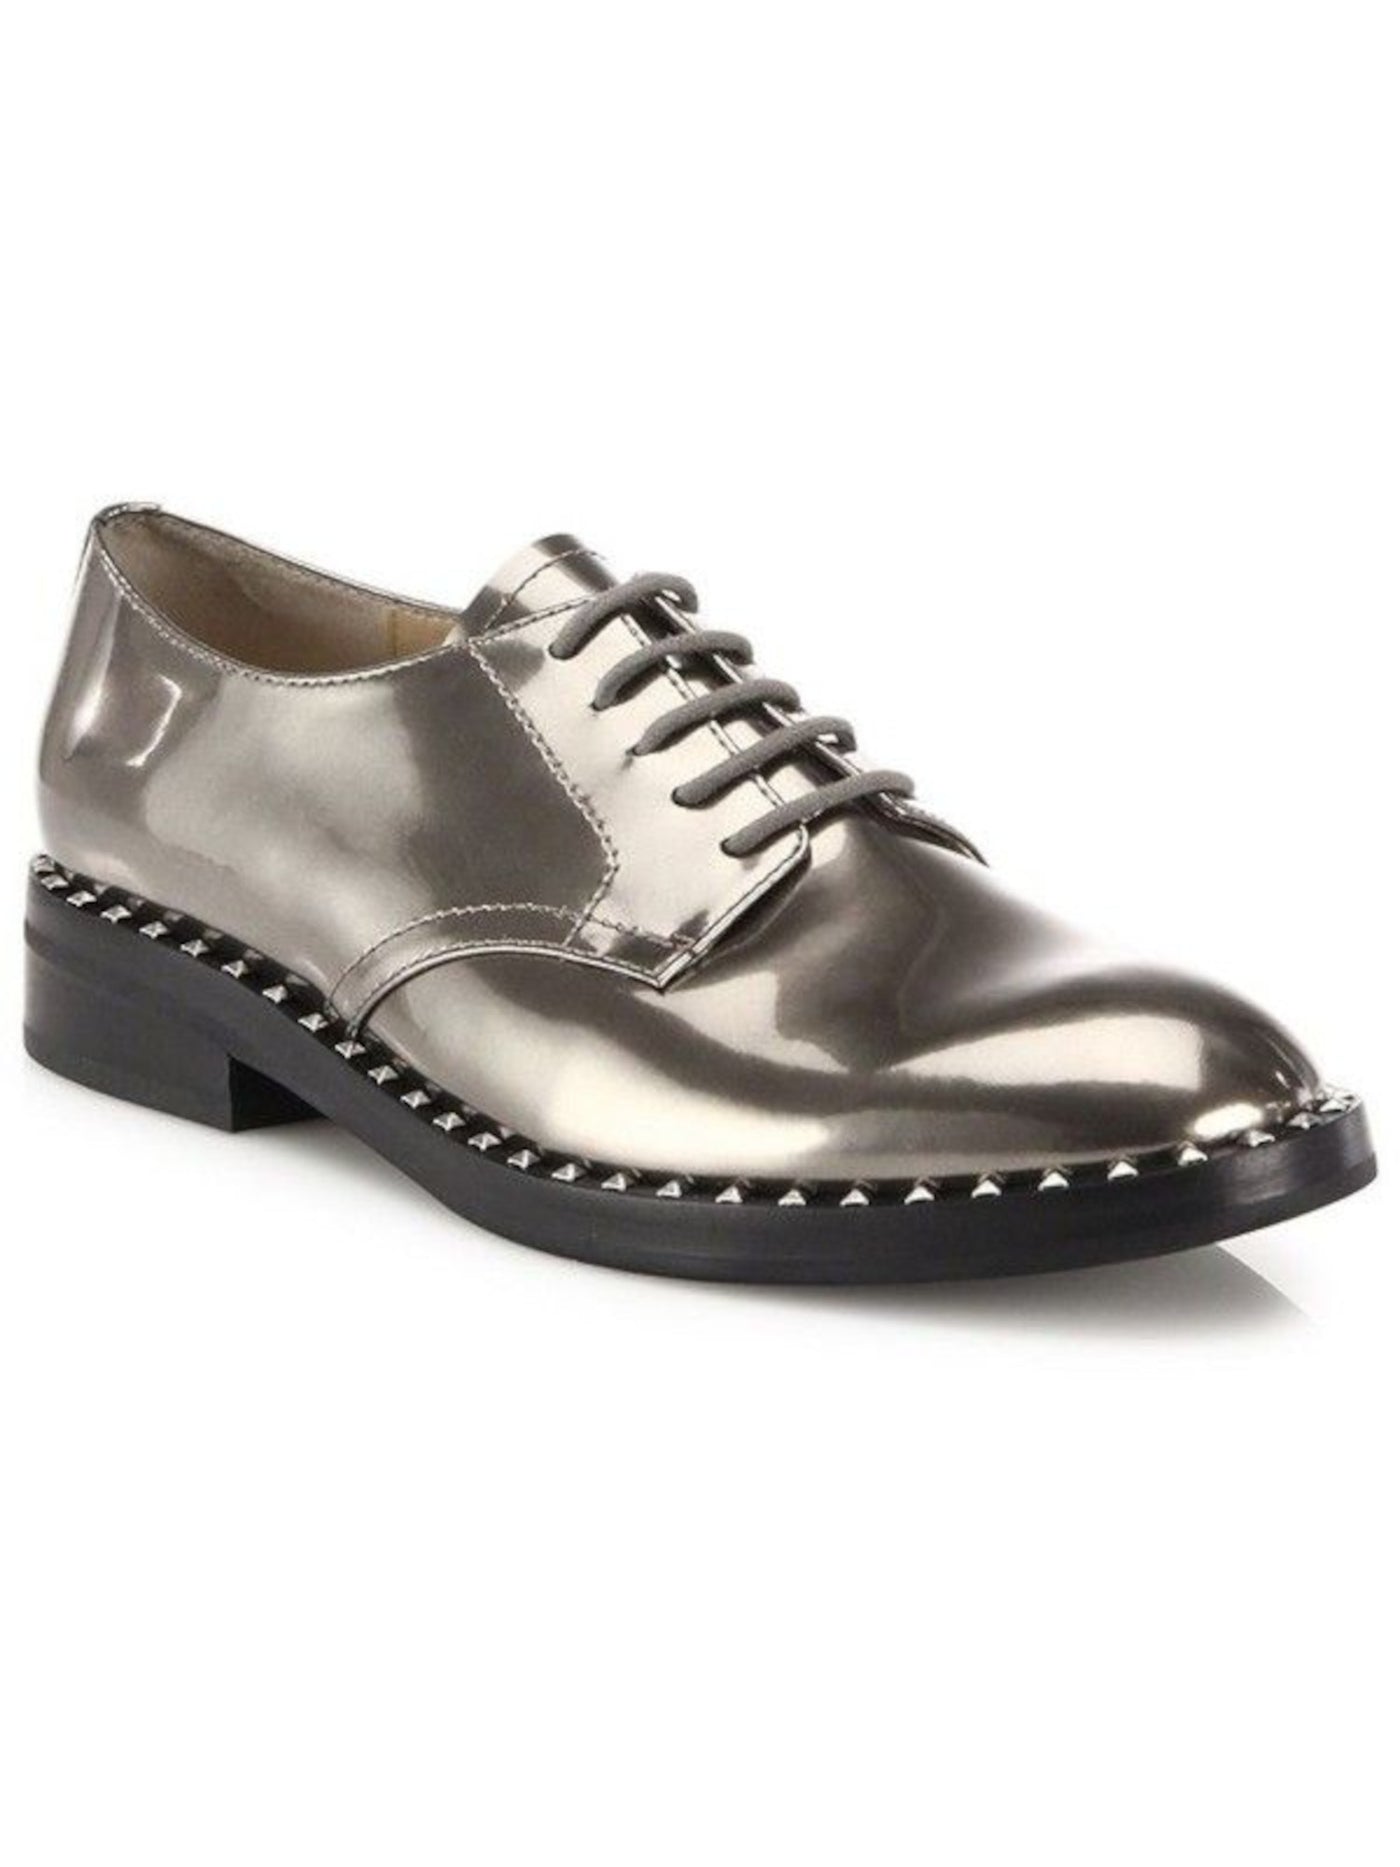 ASH Womens Silver Padded Metallic Studded Wonder Round Toe Block Heel Lace-Up Leather Dress Oxford Shoes 36